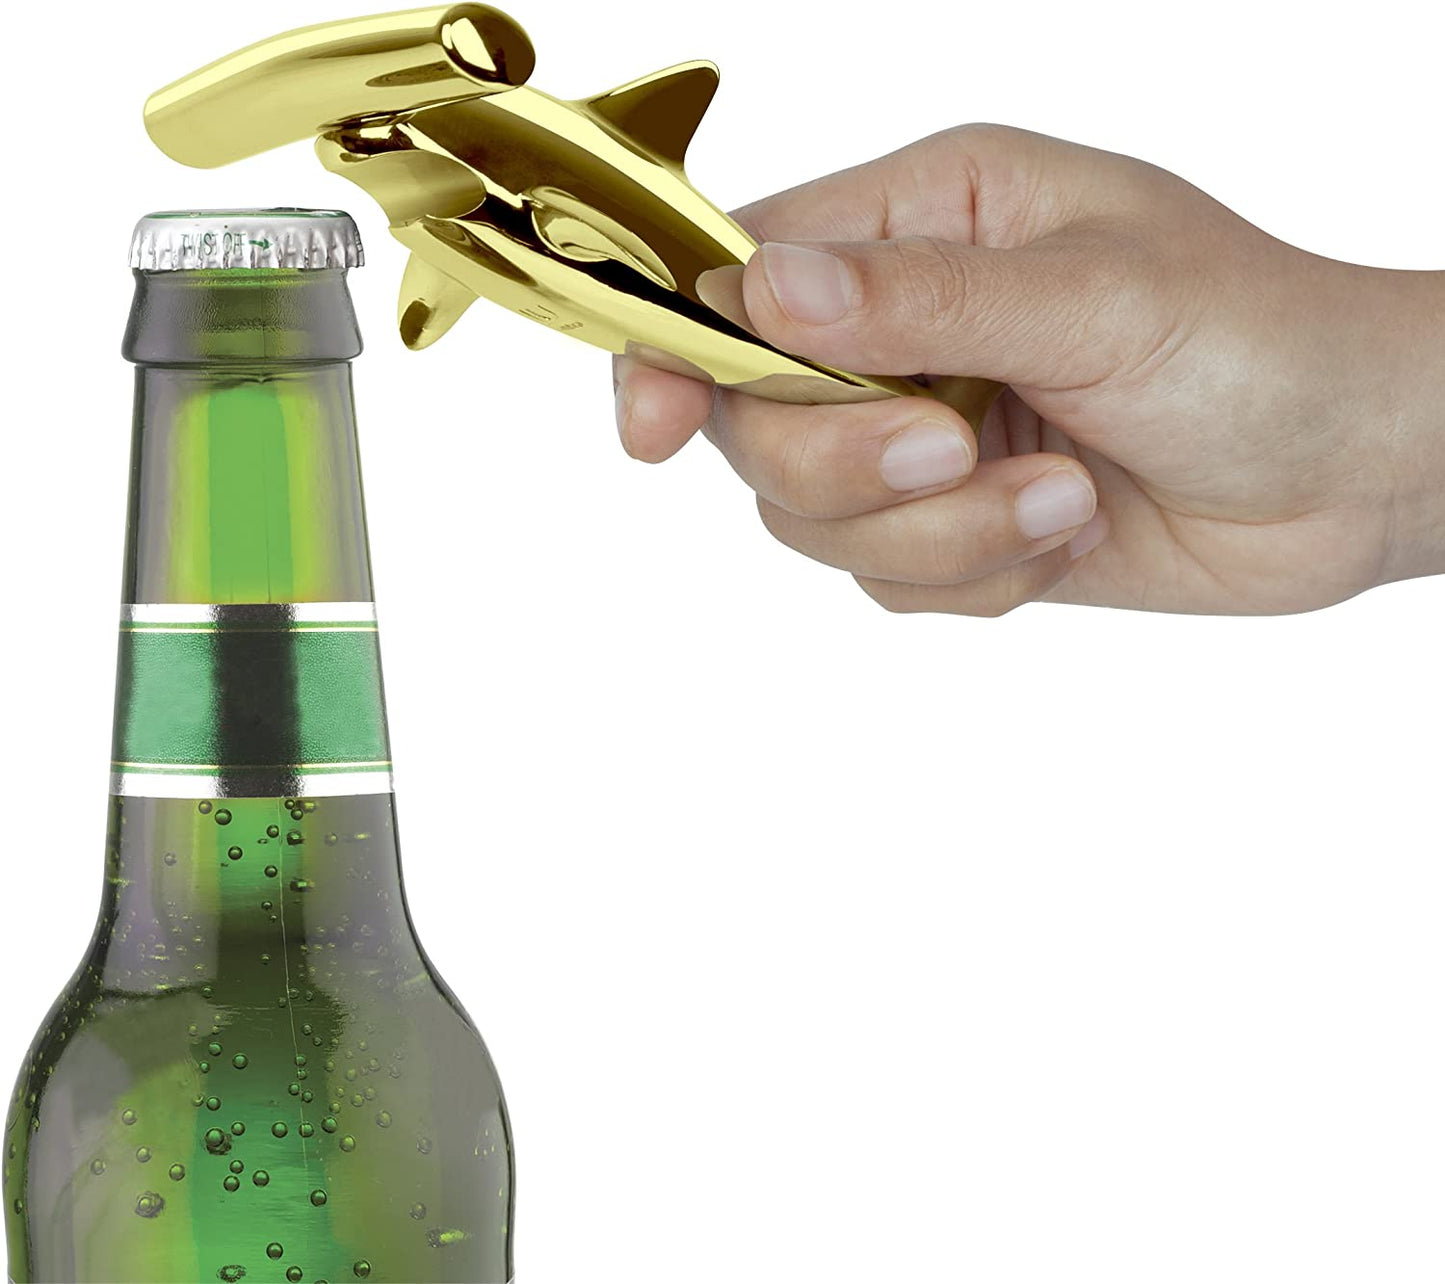 A hand using a brass colored hammerhead shark shaped bottle opener to open a bottle of beer.